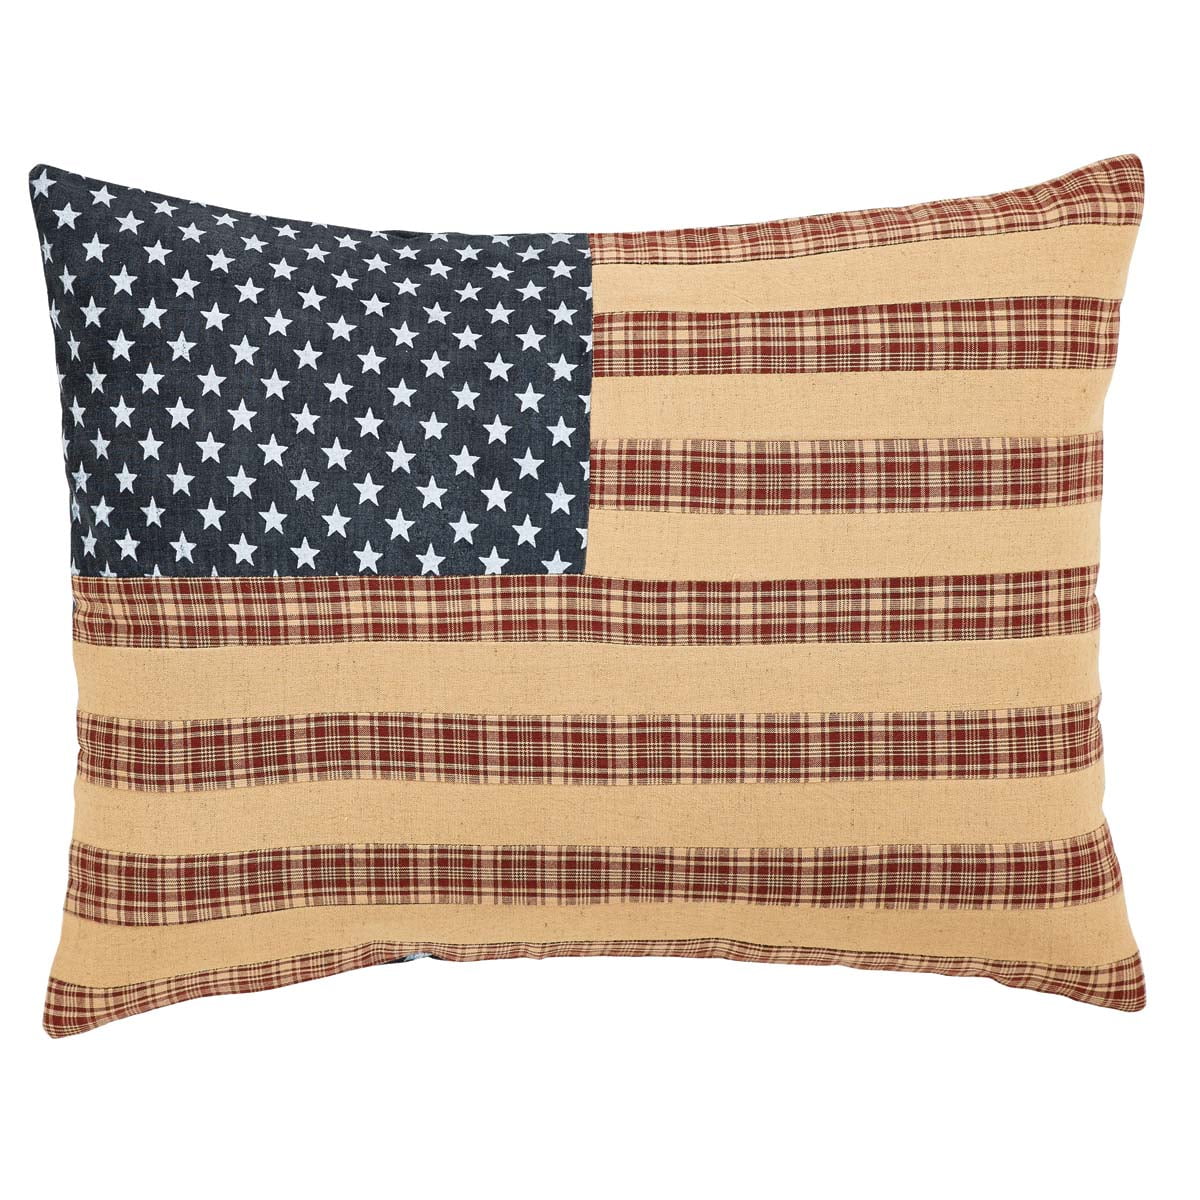 Burgundy Red Americana Bedding Independence Cotton Appliqued Flax Star Rectangle 14x18 Pillow